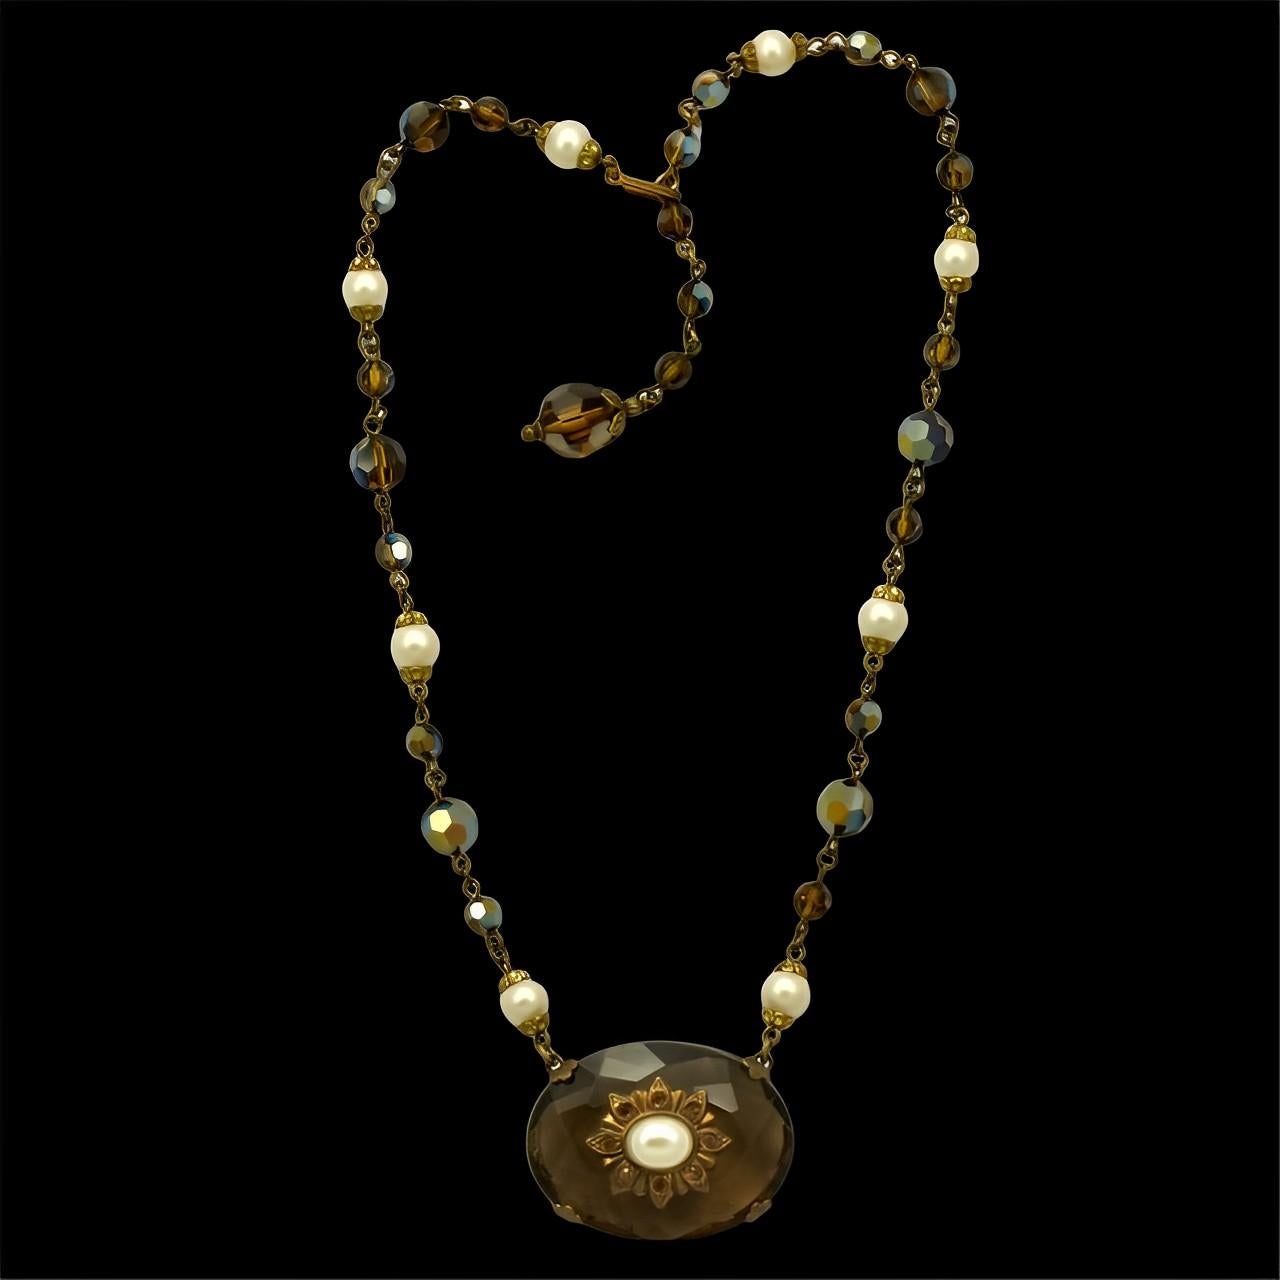 Gold Plated Aurora Borealis and Faux Pearl Necklace with a Glass Centrepiece For Sale 5